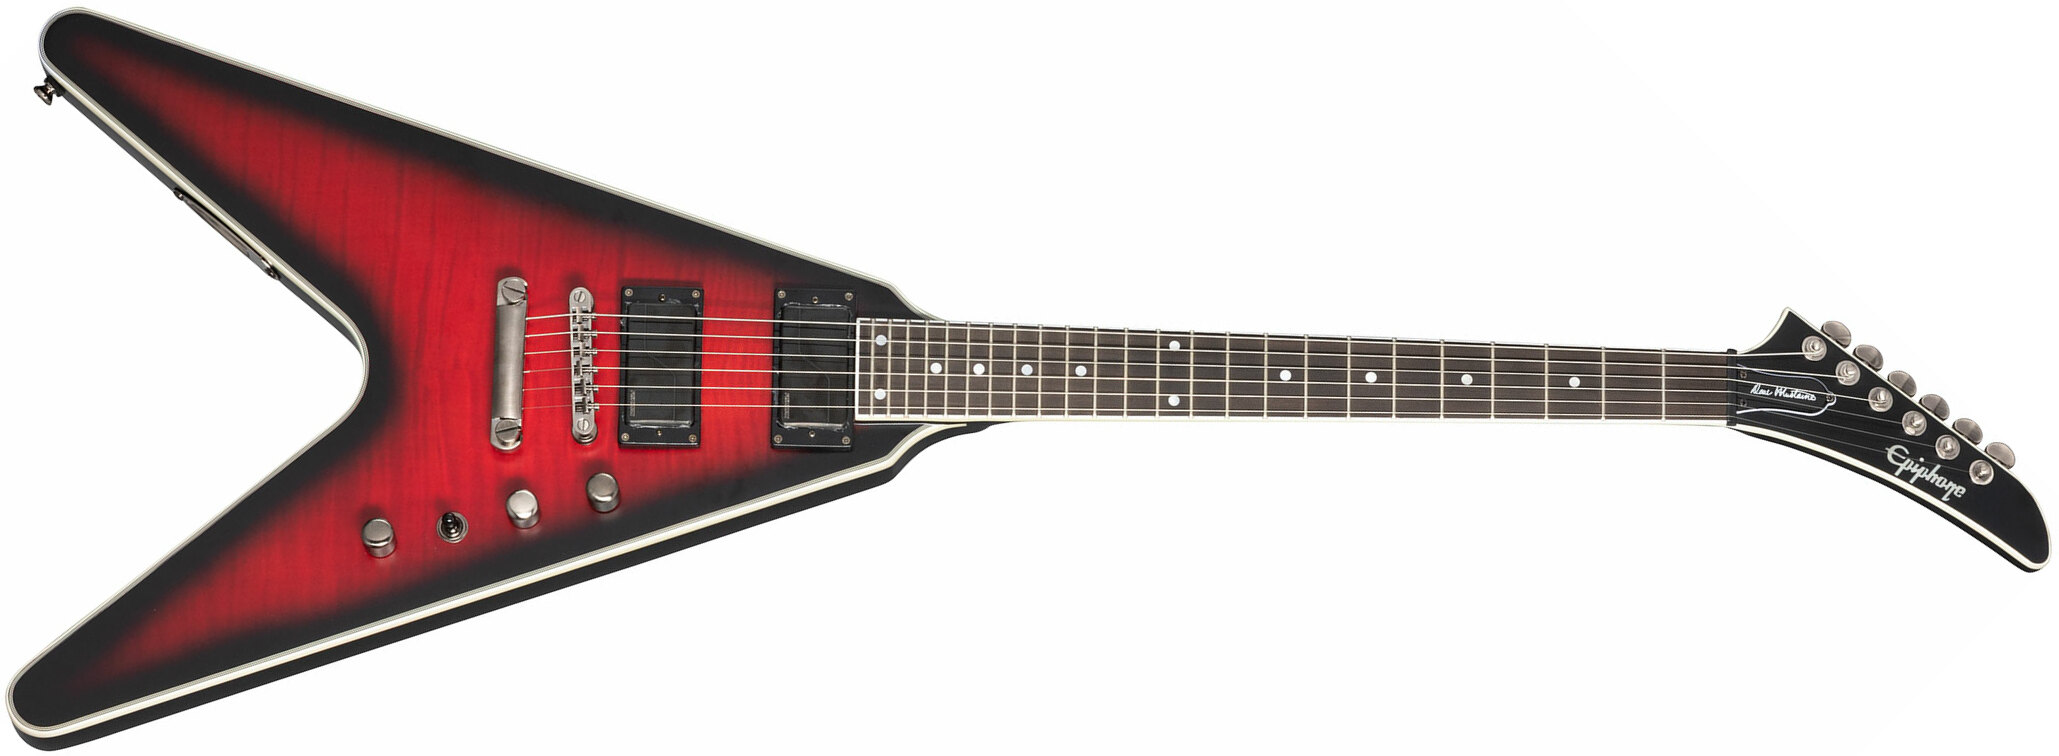 Epiphone Dave Mustaine Flying V Prophecy 2h Fishman Fluence Ht Eb - Aged Dark Red Burst - Guitare Électrique MÉtal - Main picture